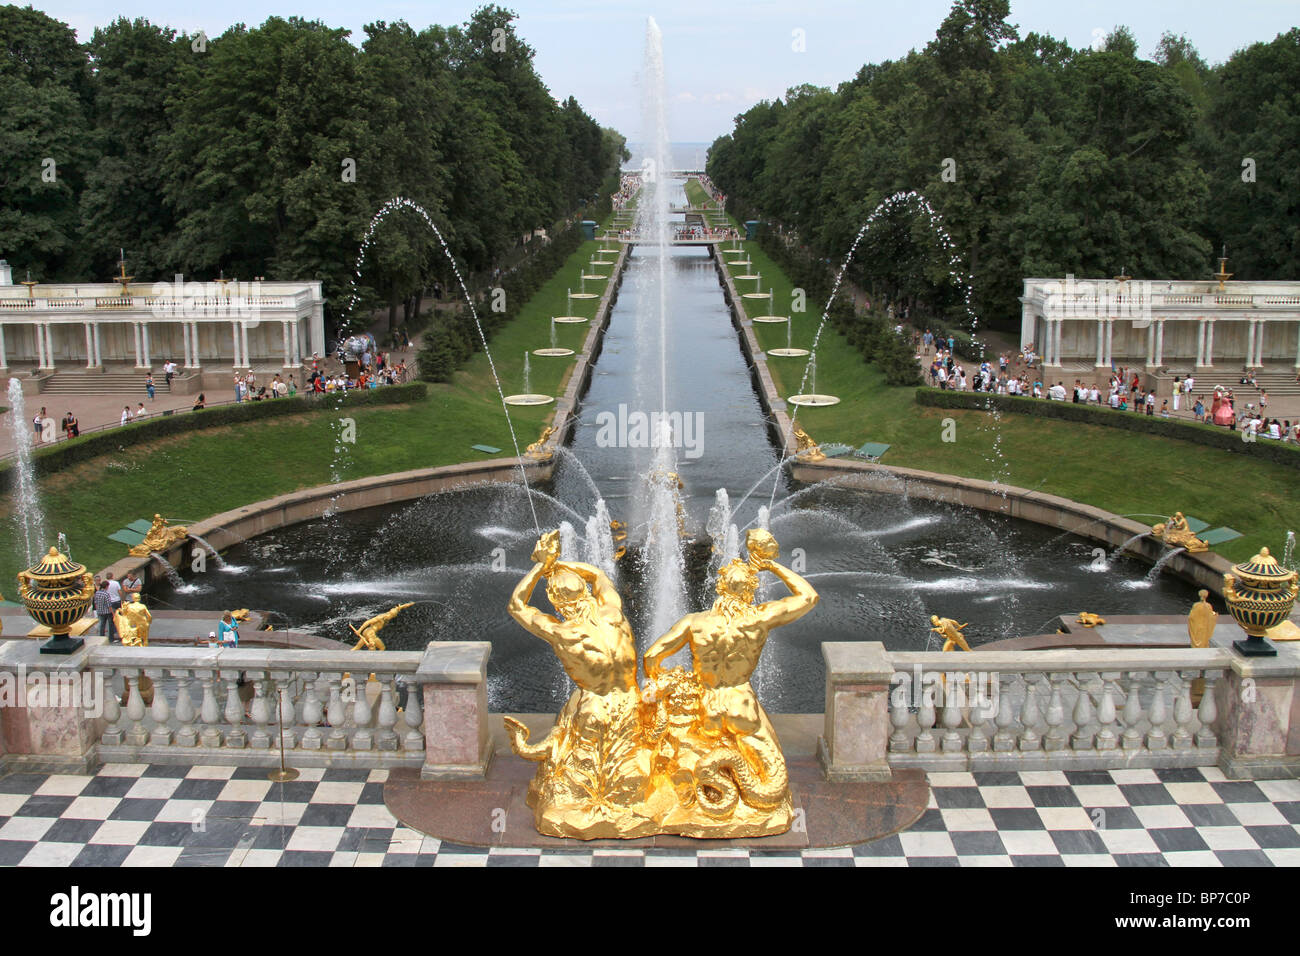 Peterhof Palace and Garden in St. Petersburg, Russia Stock Photo